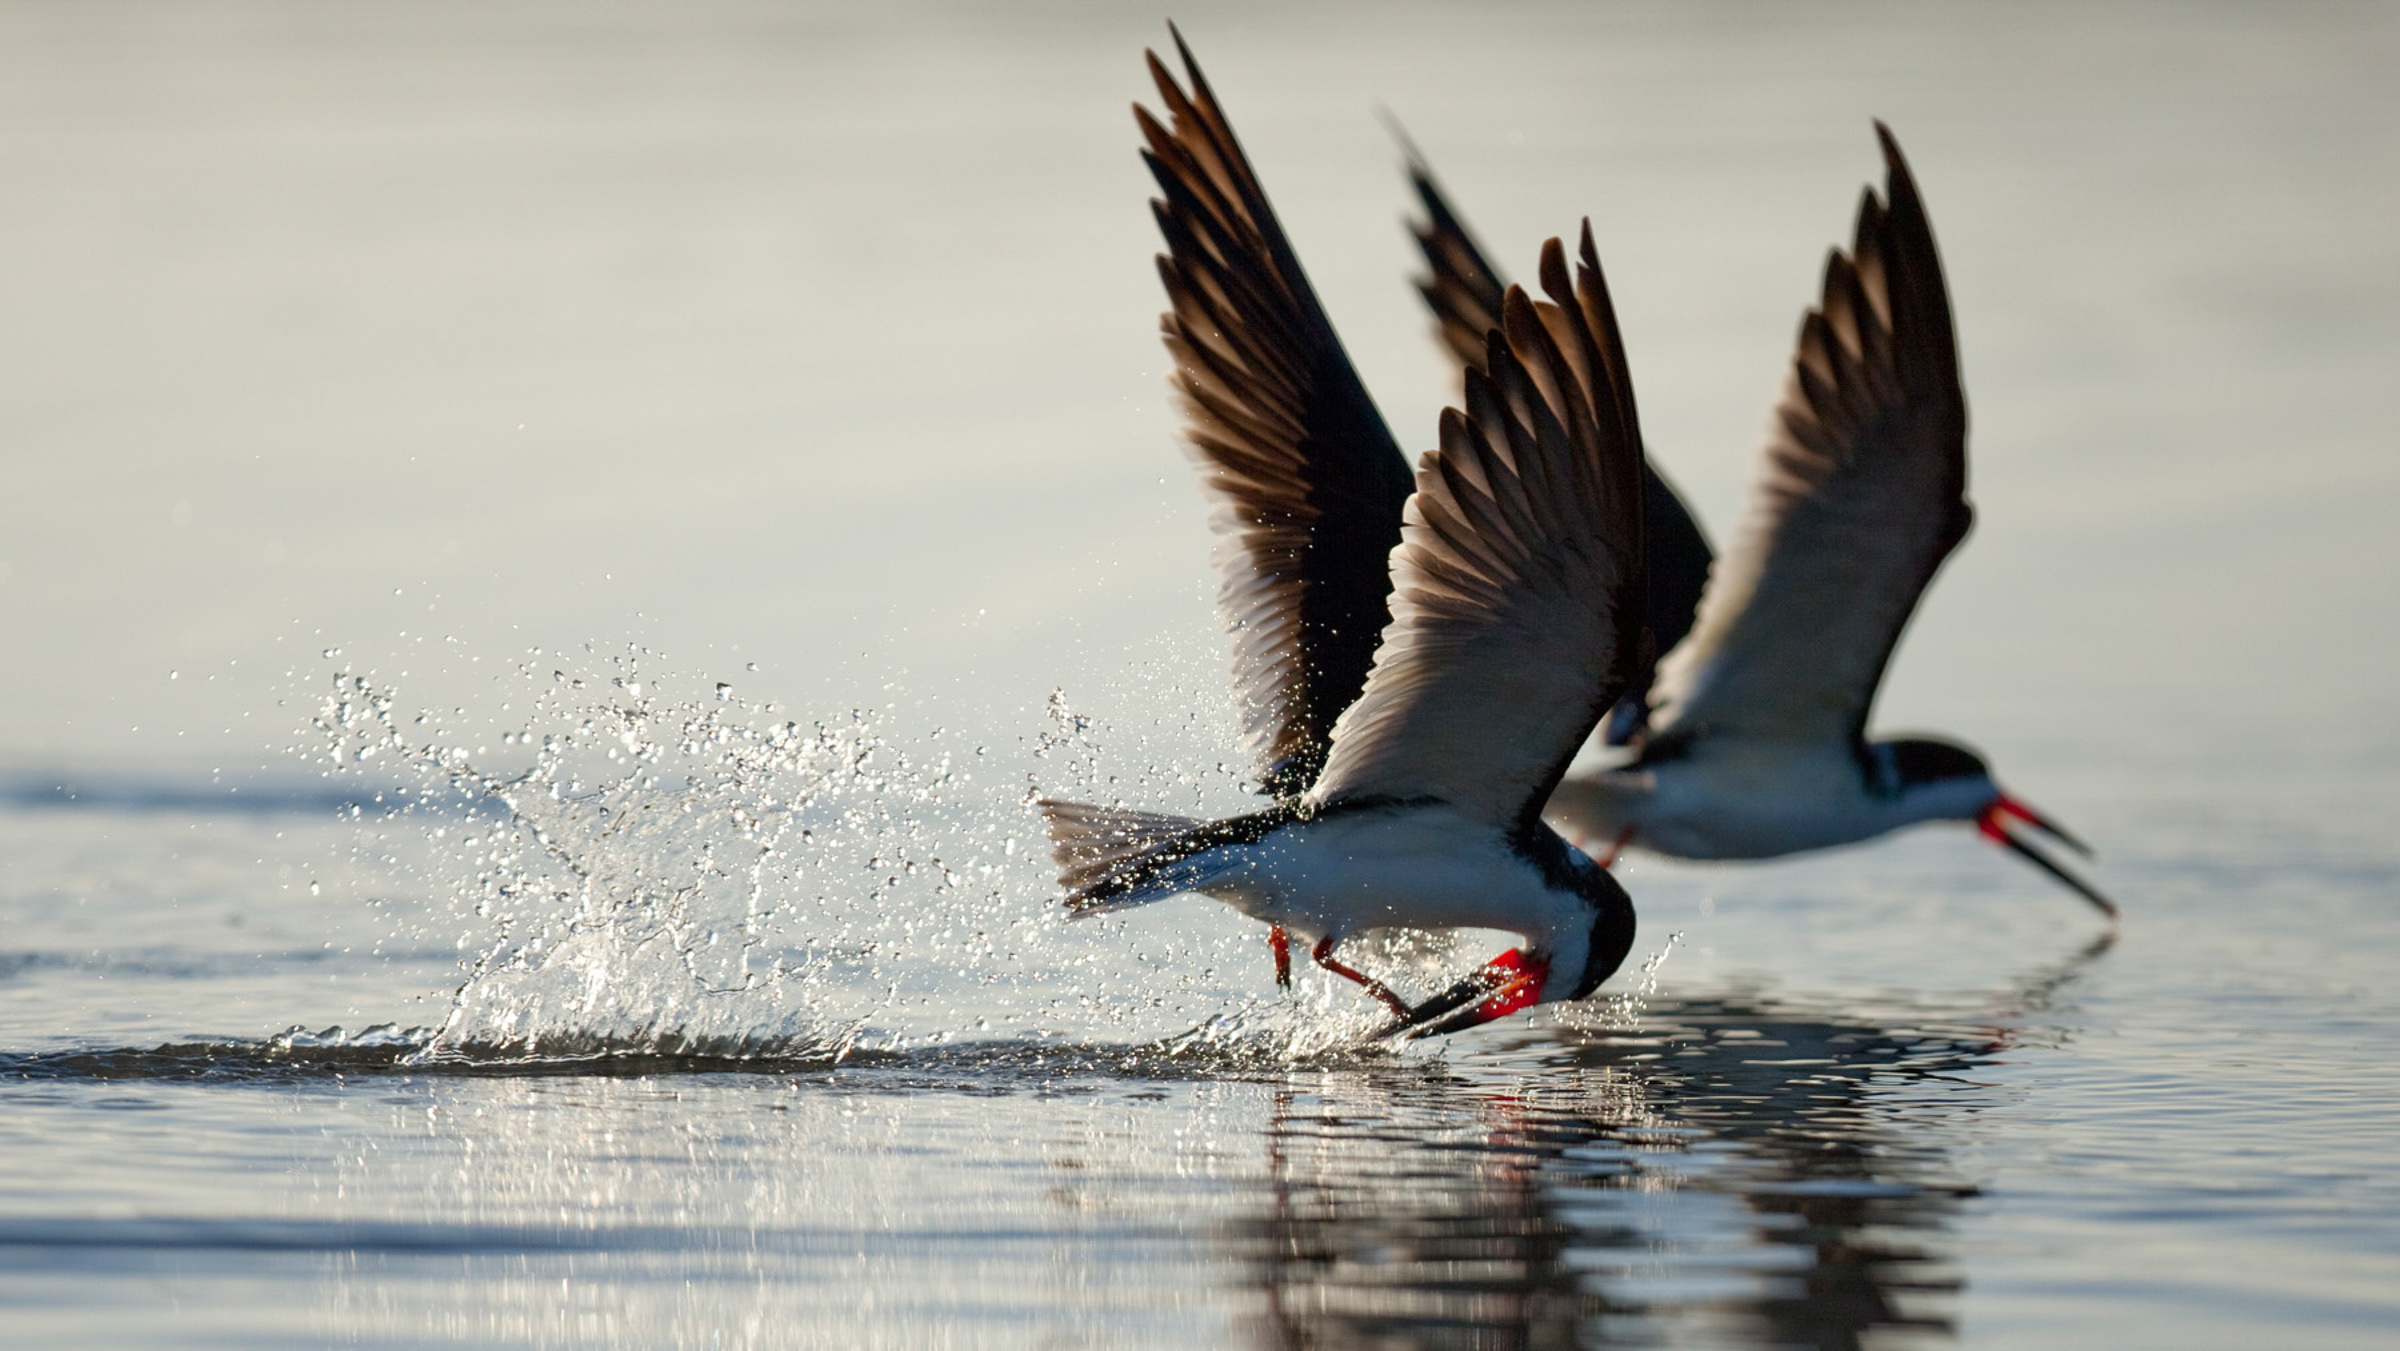 Two Black Skimmers skim over the surface of calm water.